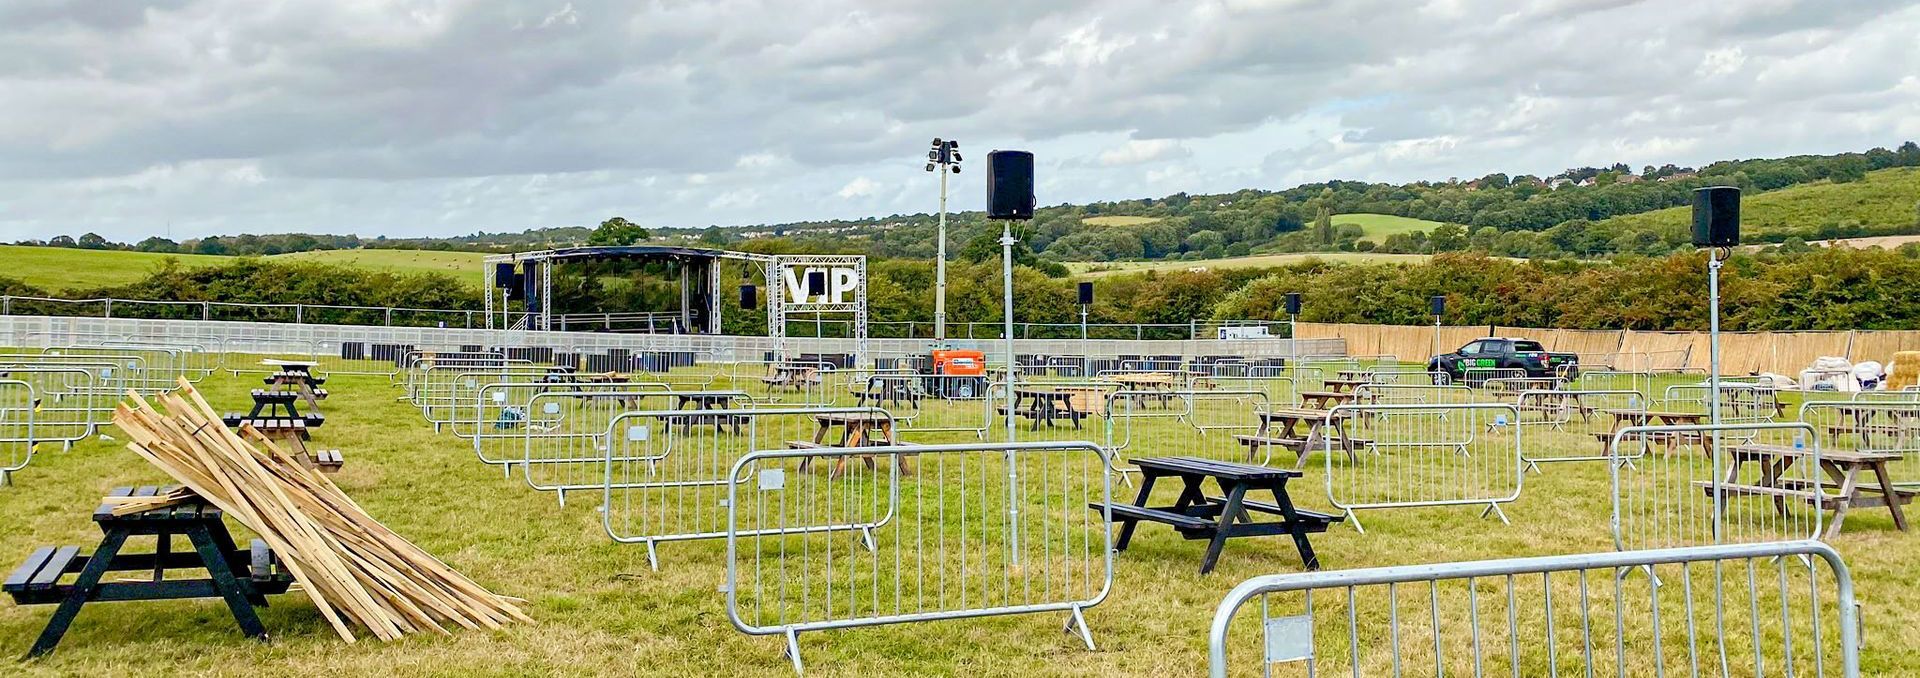 An event site set up socially distanced with a trailer stage in the background and speaker system through the site.